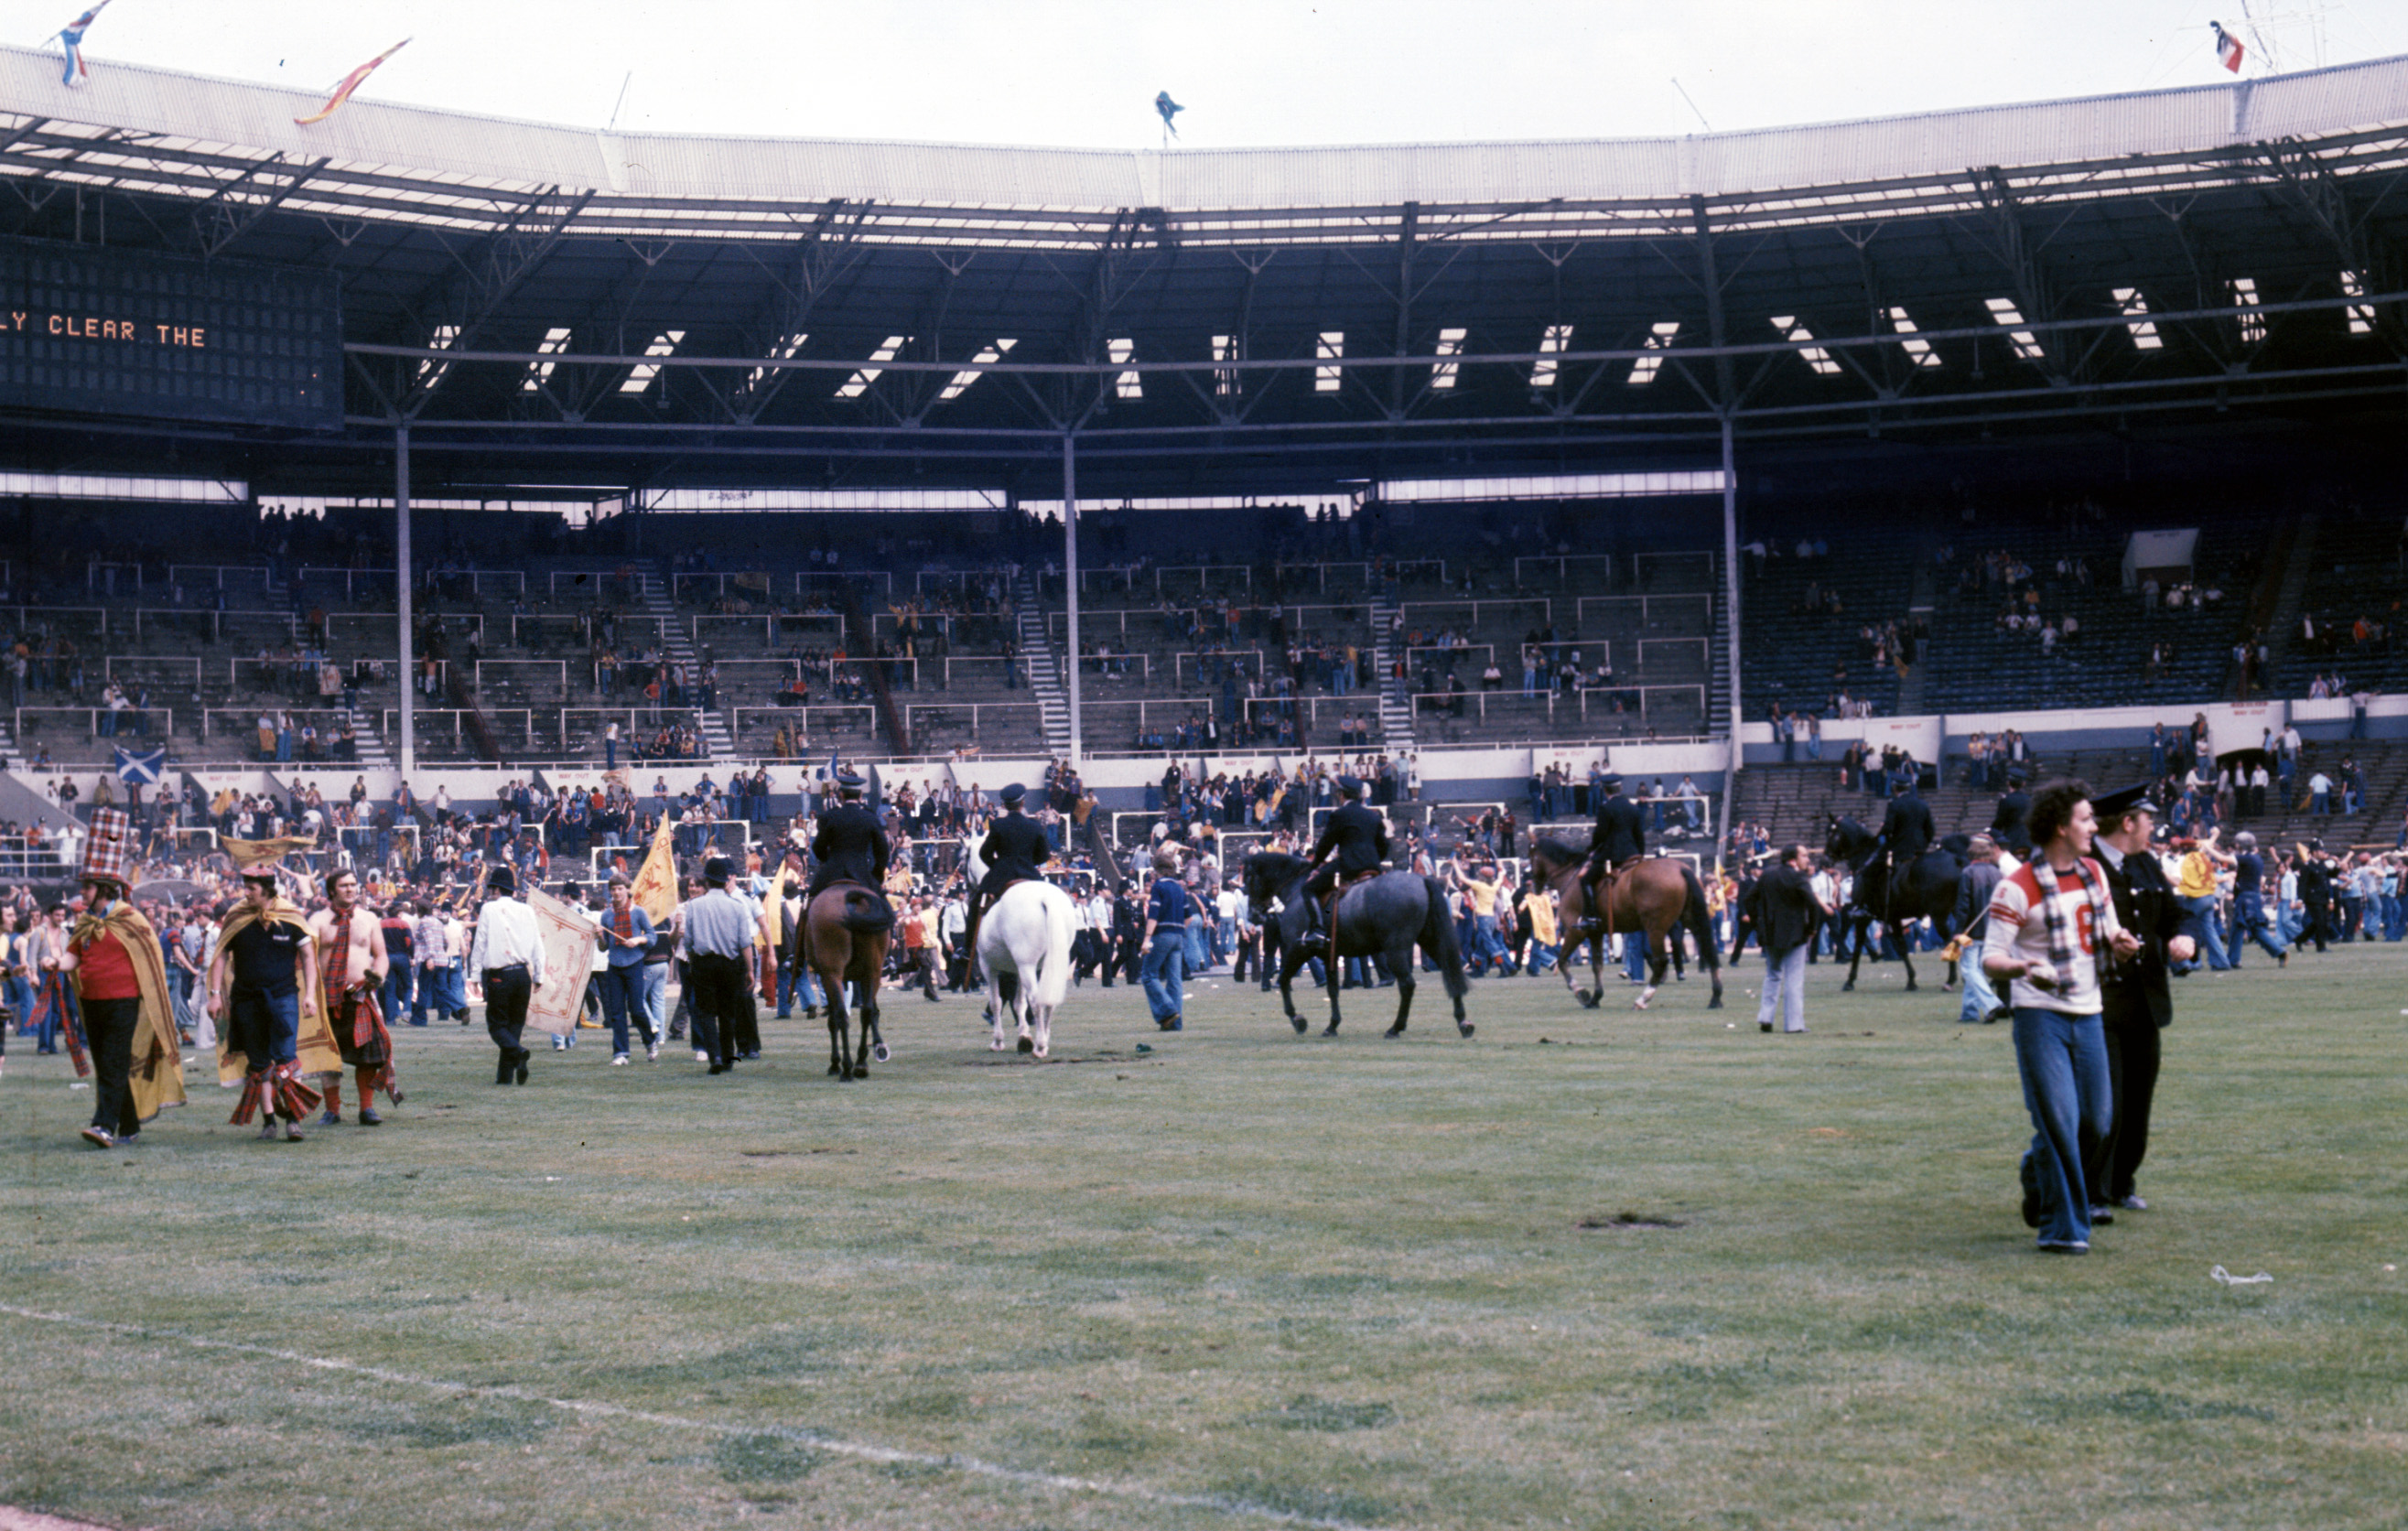 Scotland fans invade the Wembley pitch after the 1977 game.